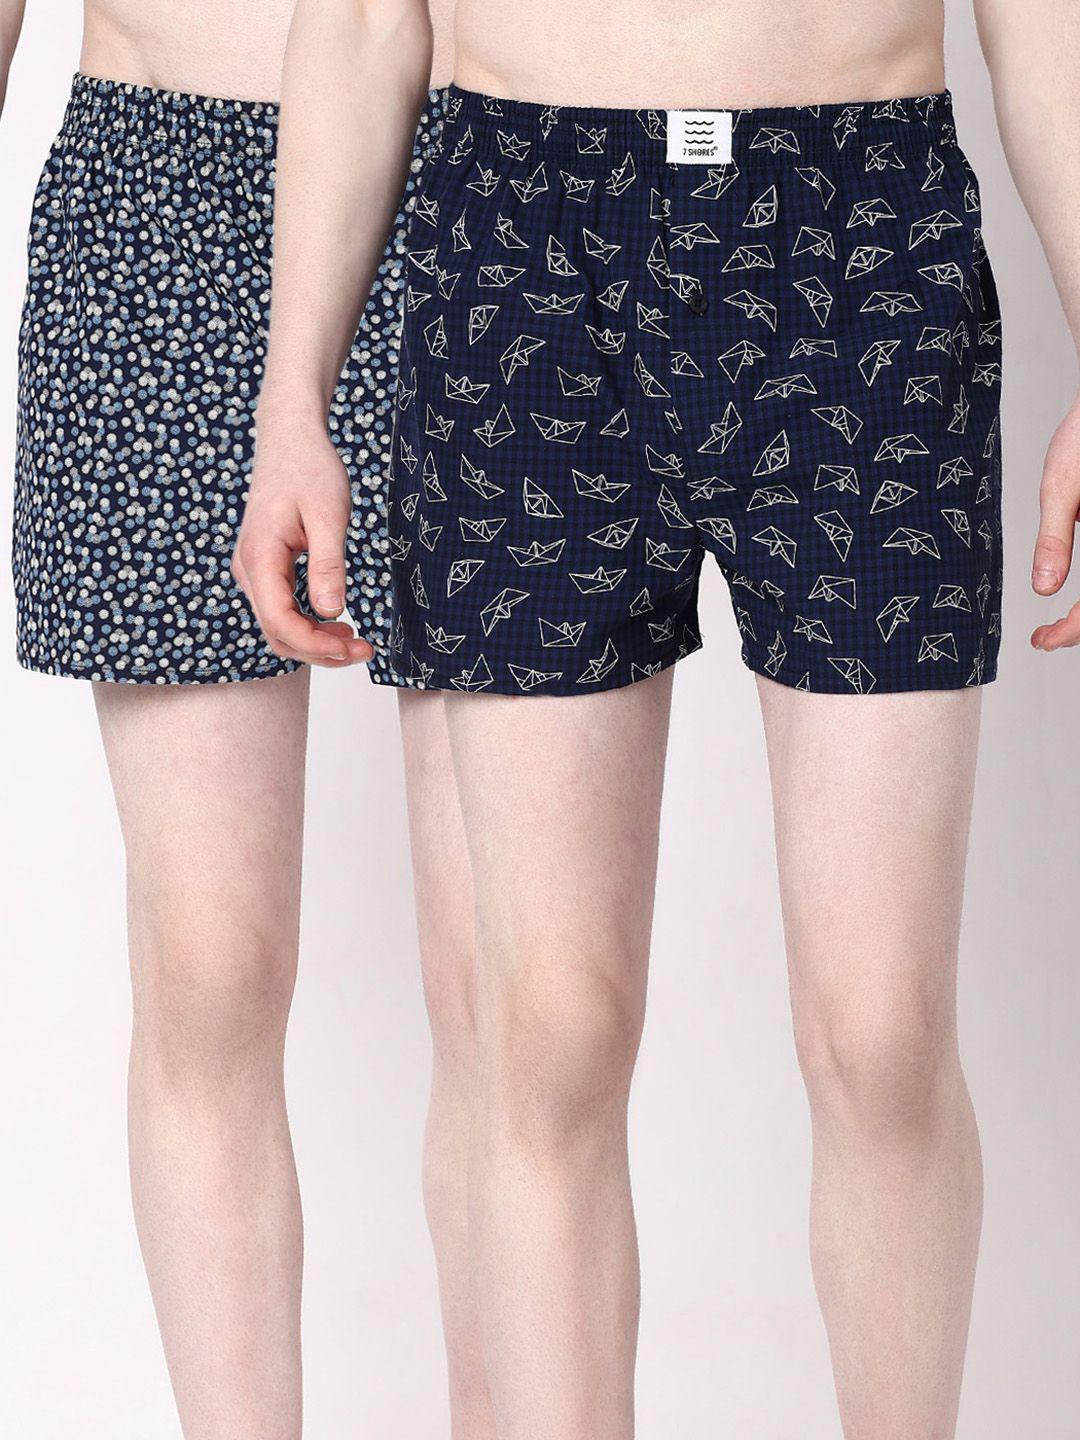 7shores pack of 2 printed cotton breathable boxers bst-005